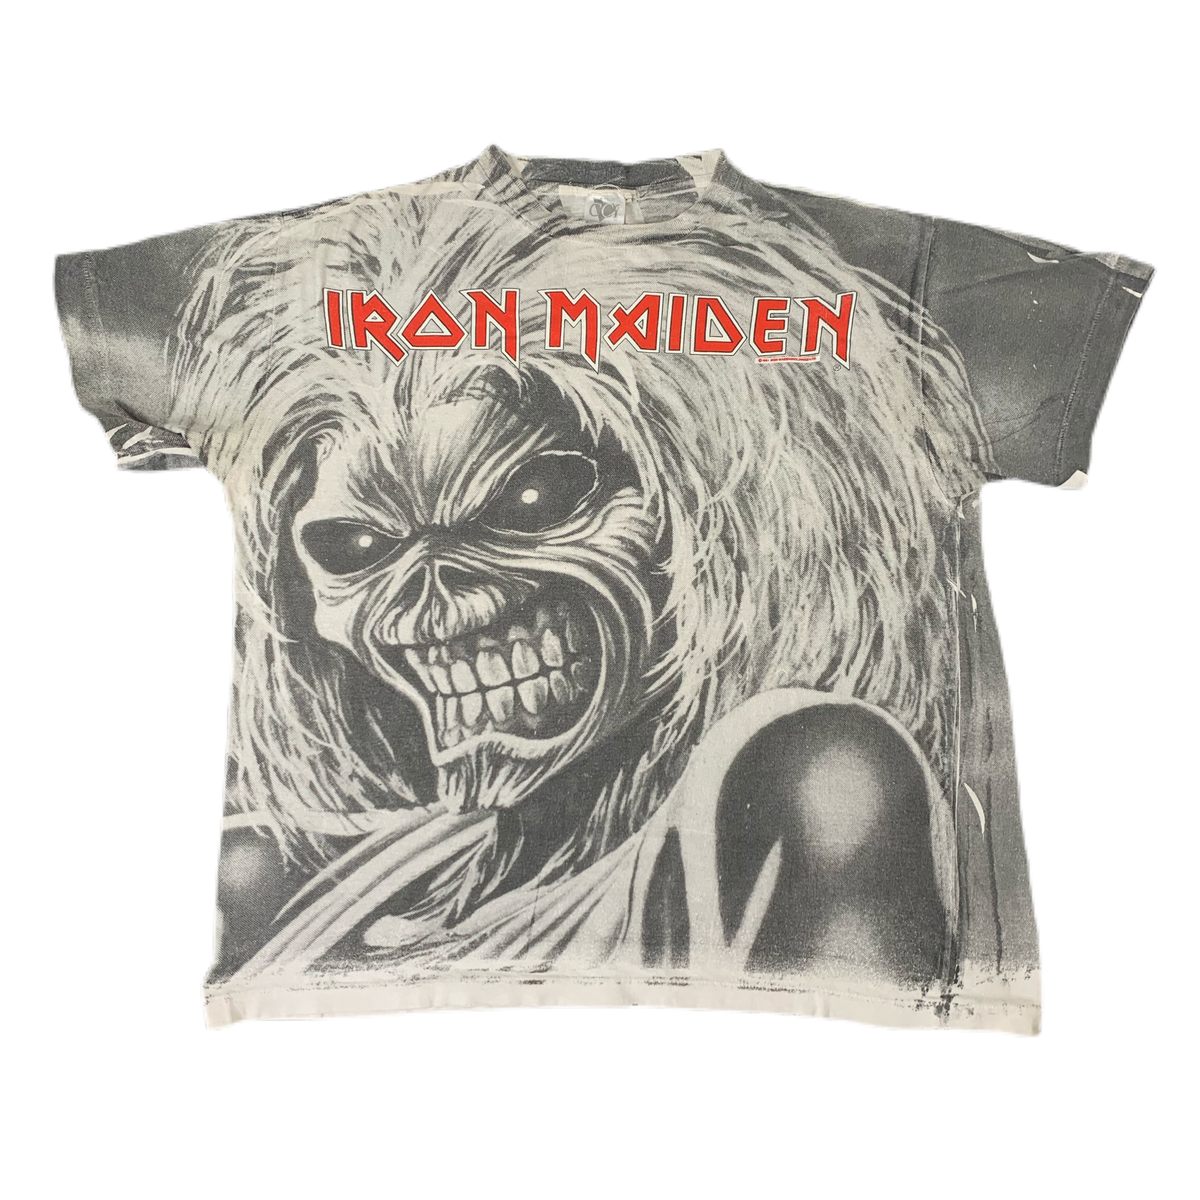 Vintage Iron Maiden “All Over Print” T-Shirt